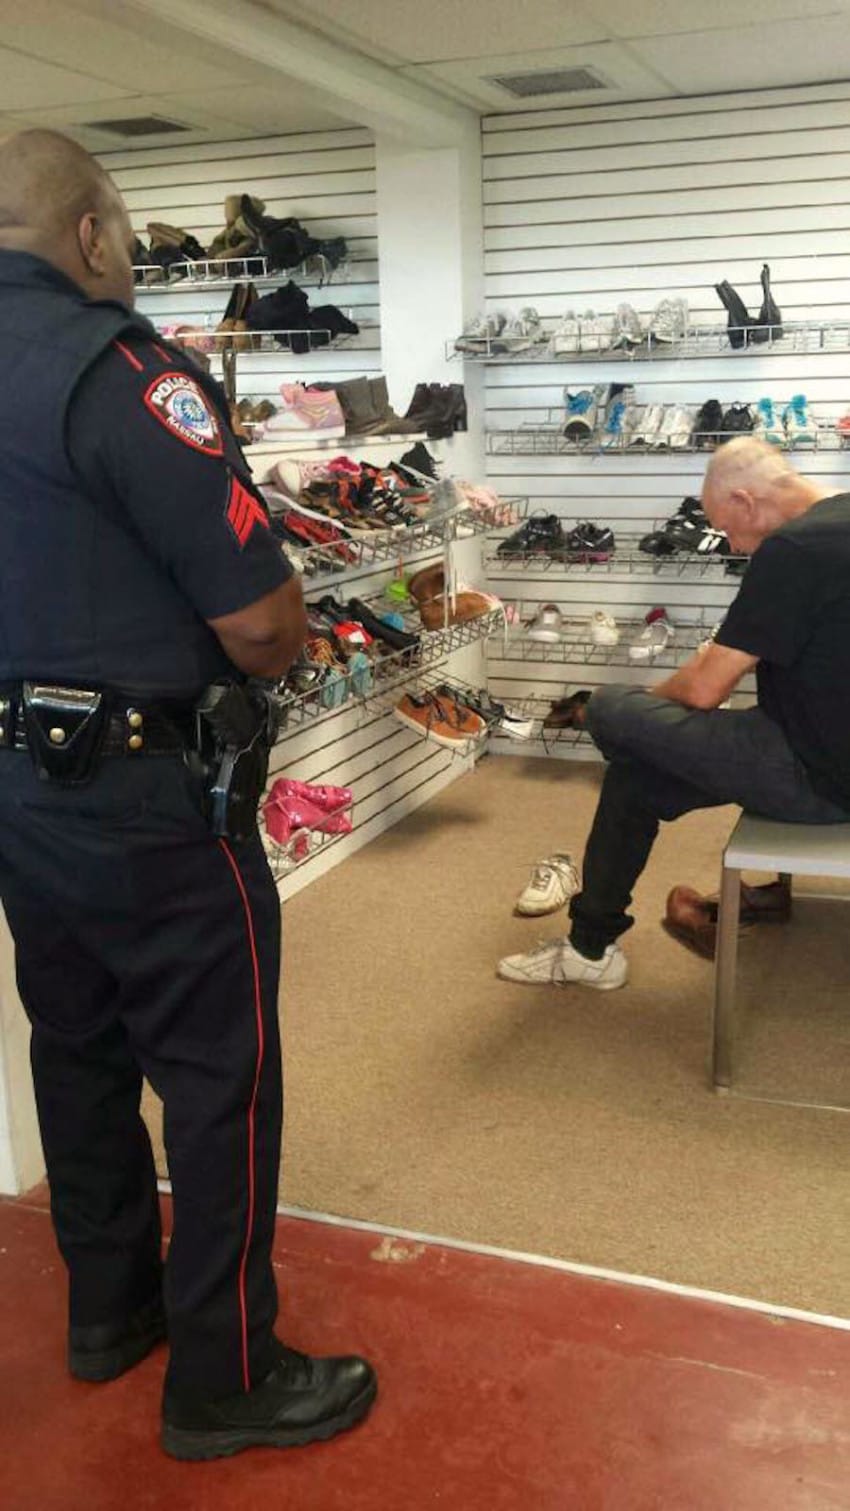 With no family or friends, and nowhere to go, the officer bought him some new shoes and socks before dropping him at the bus that would take him to the homeless shelter.